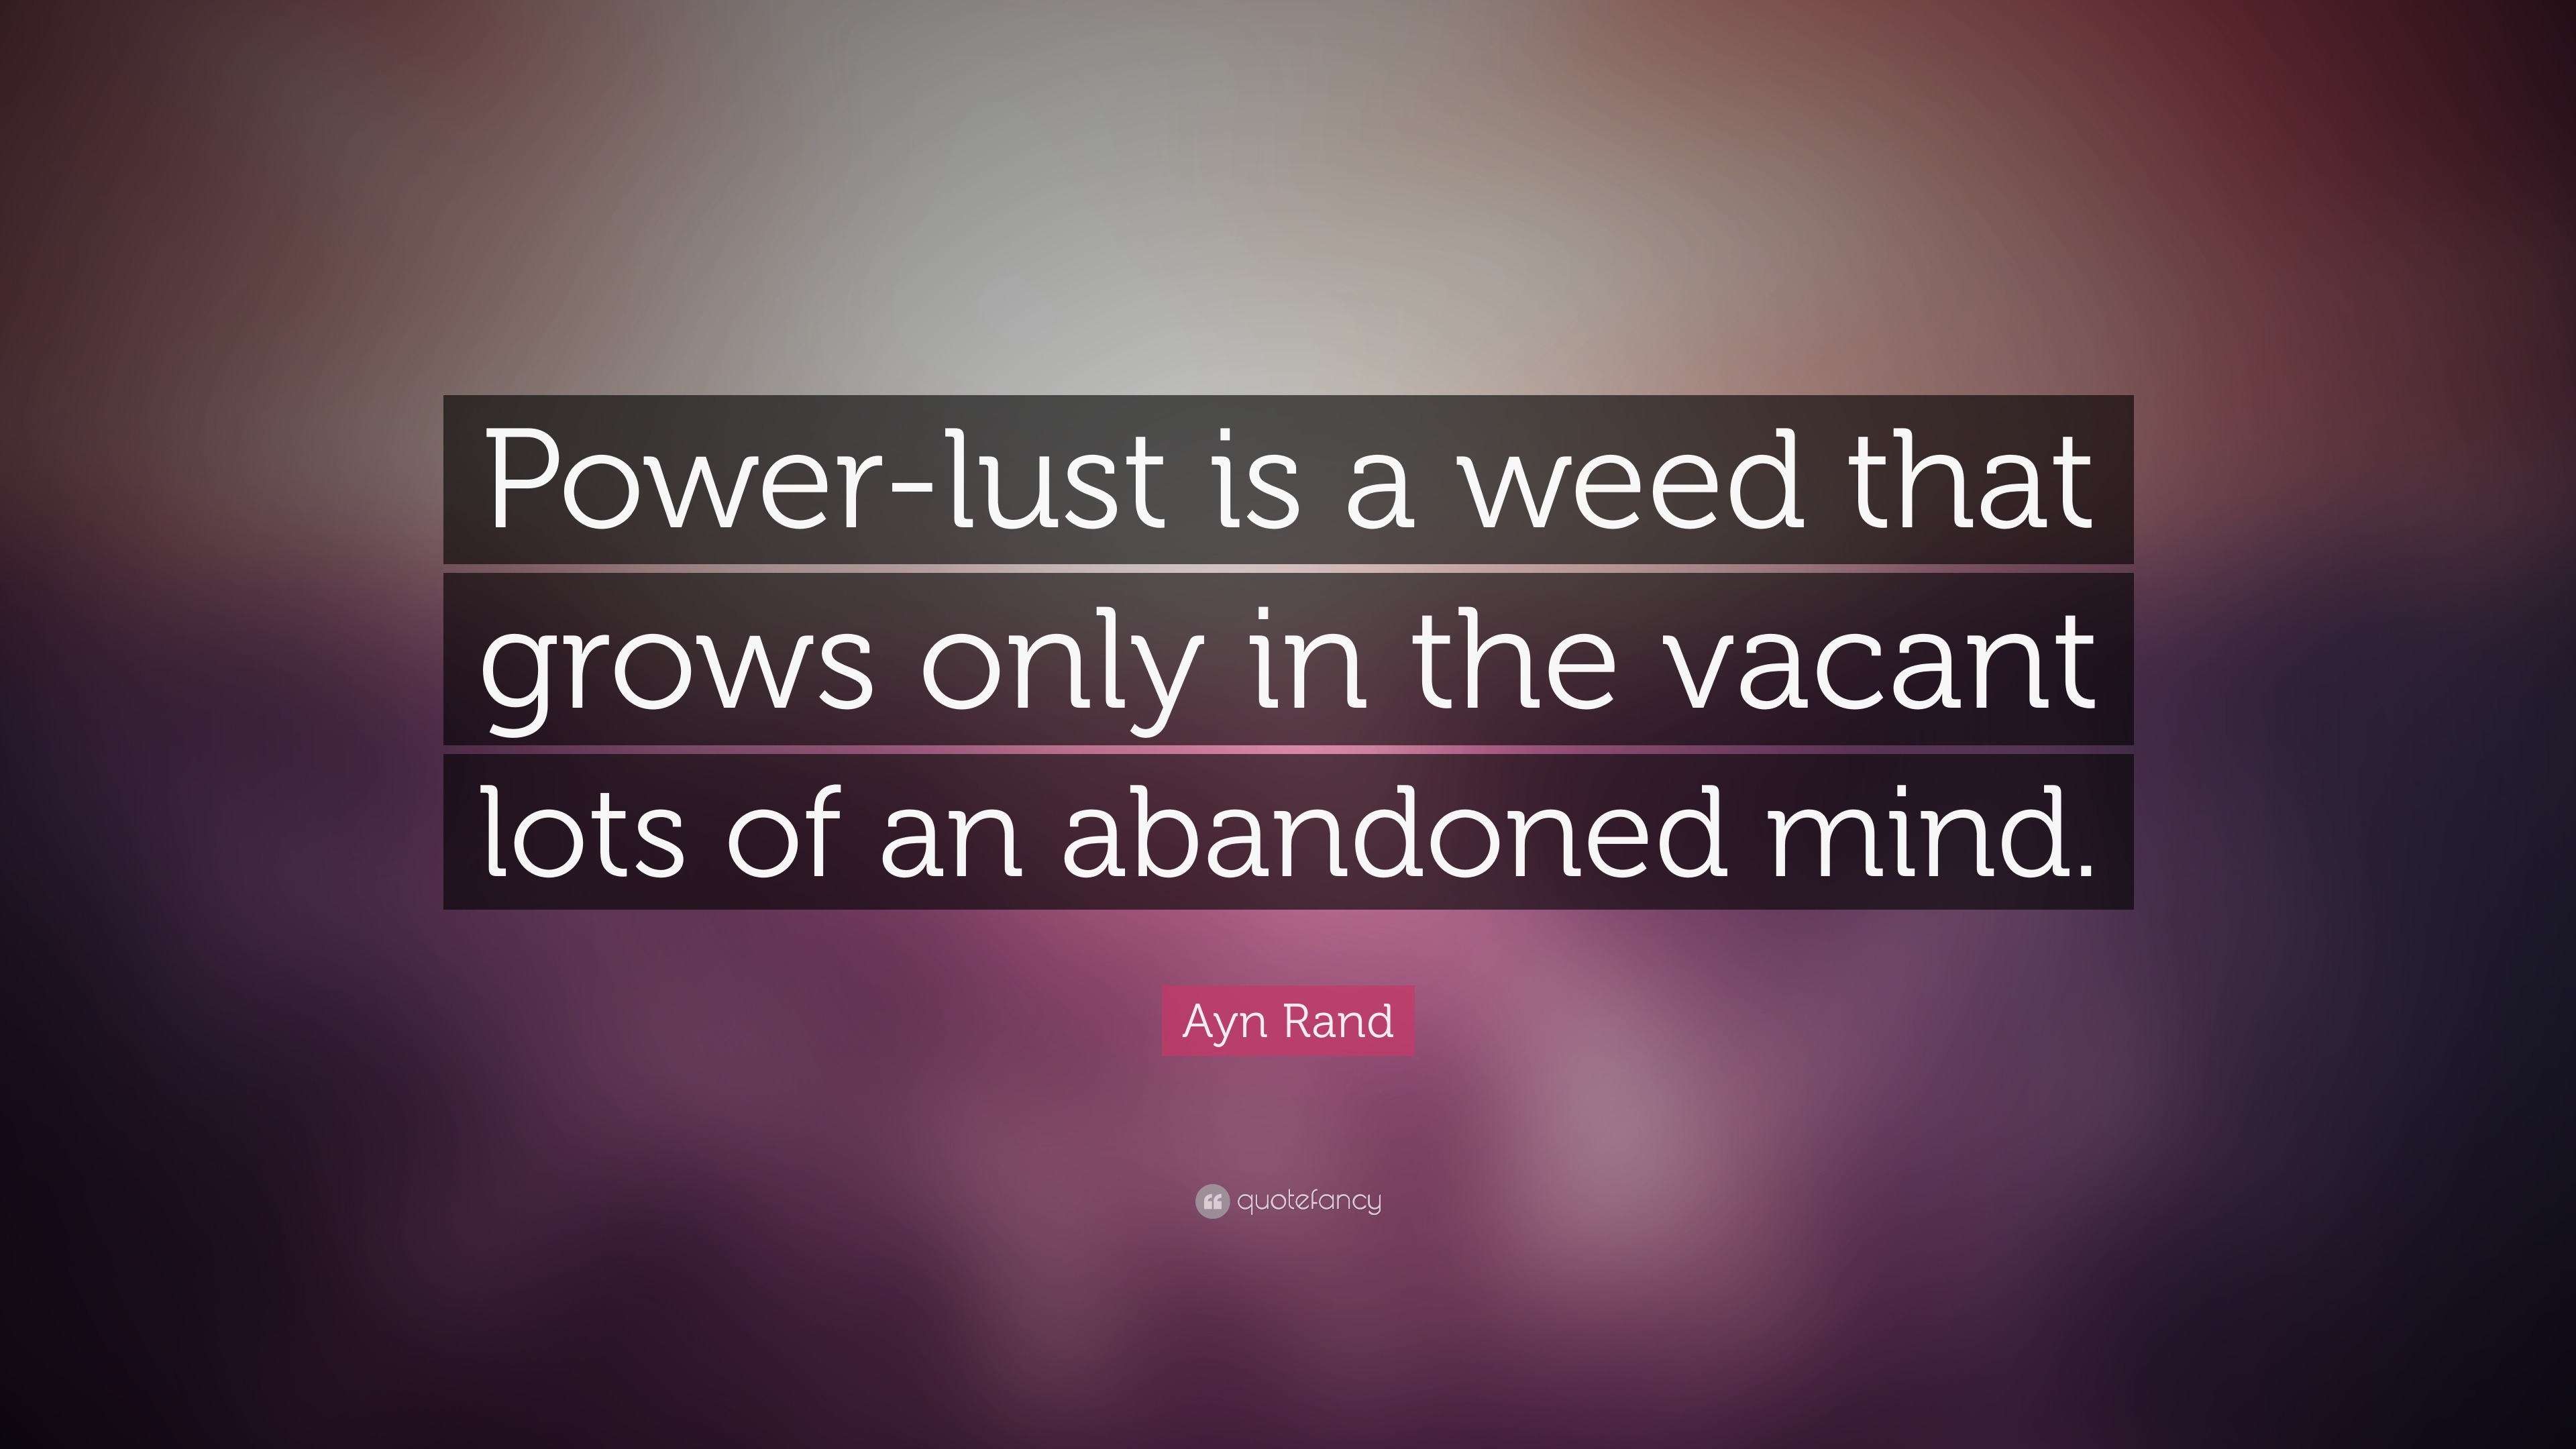 Ayn Rand Quote: "Power-lust is a weed that grows only in the vacant lots of an abandoned mind ...